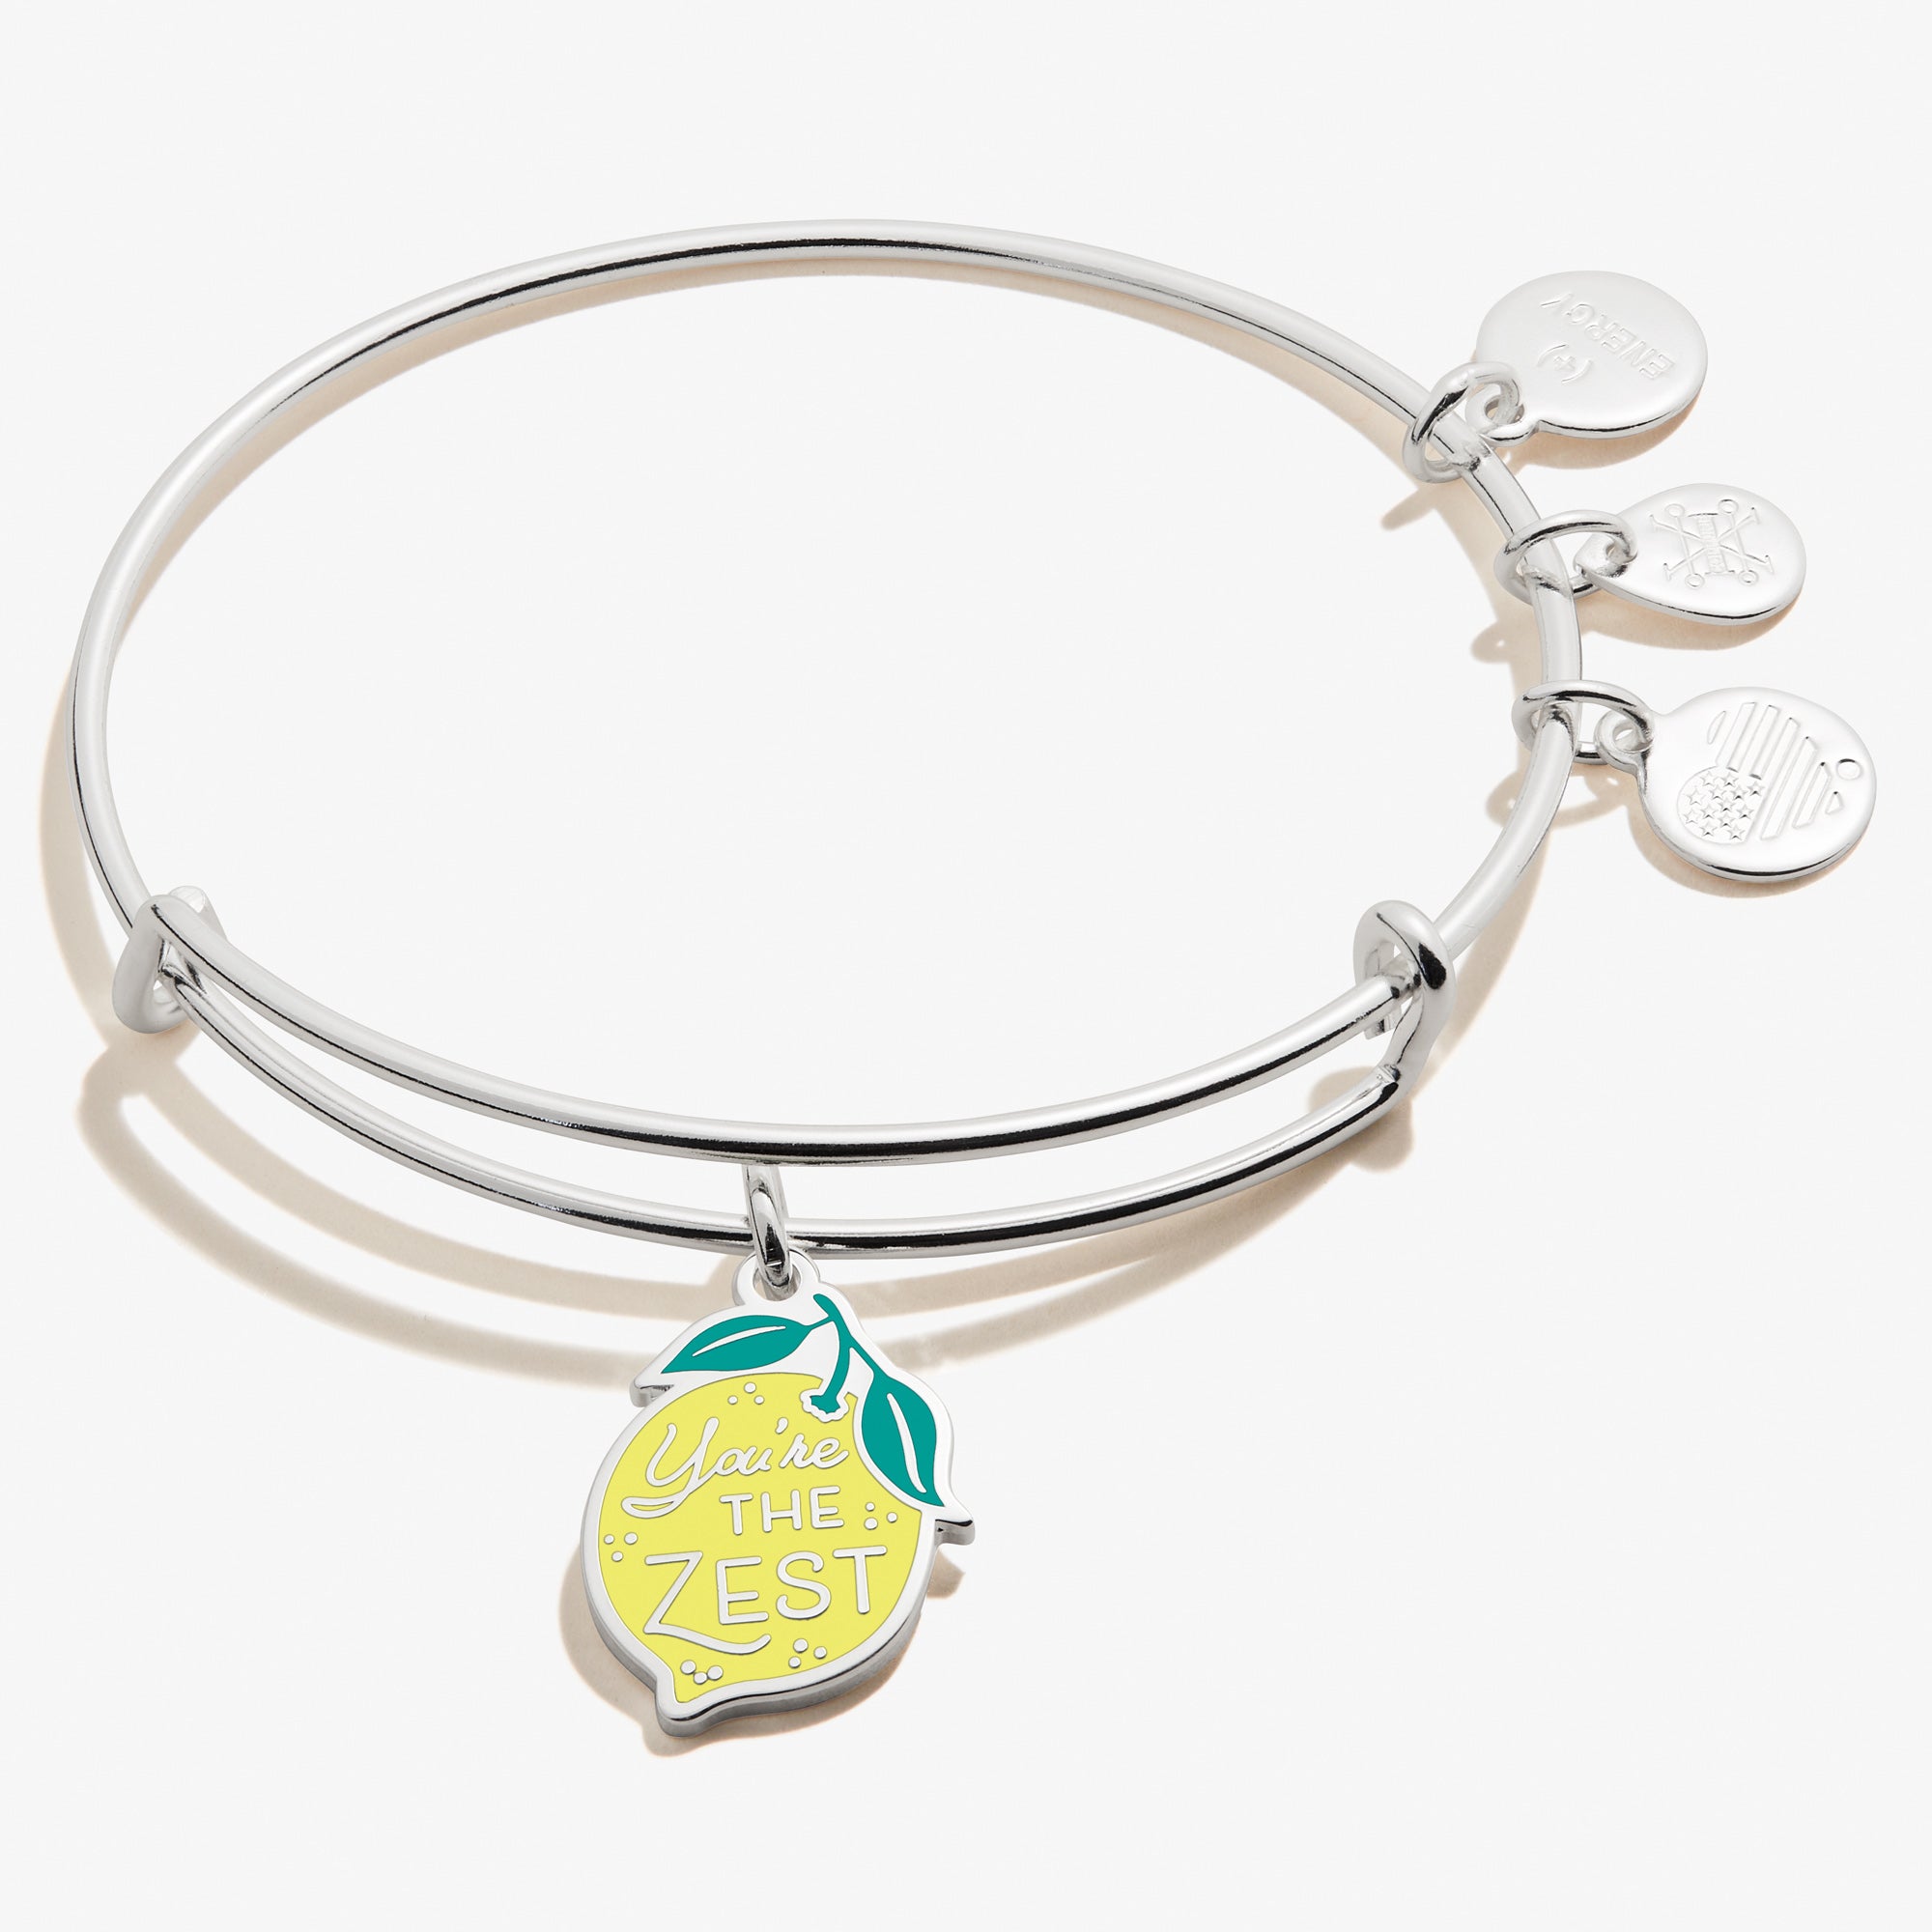 ALEX & ANI ZEST FOR LIFE BRACELET BRAND NEW WITH BOX AND CARD #3 